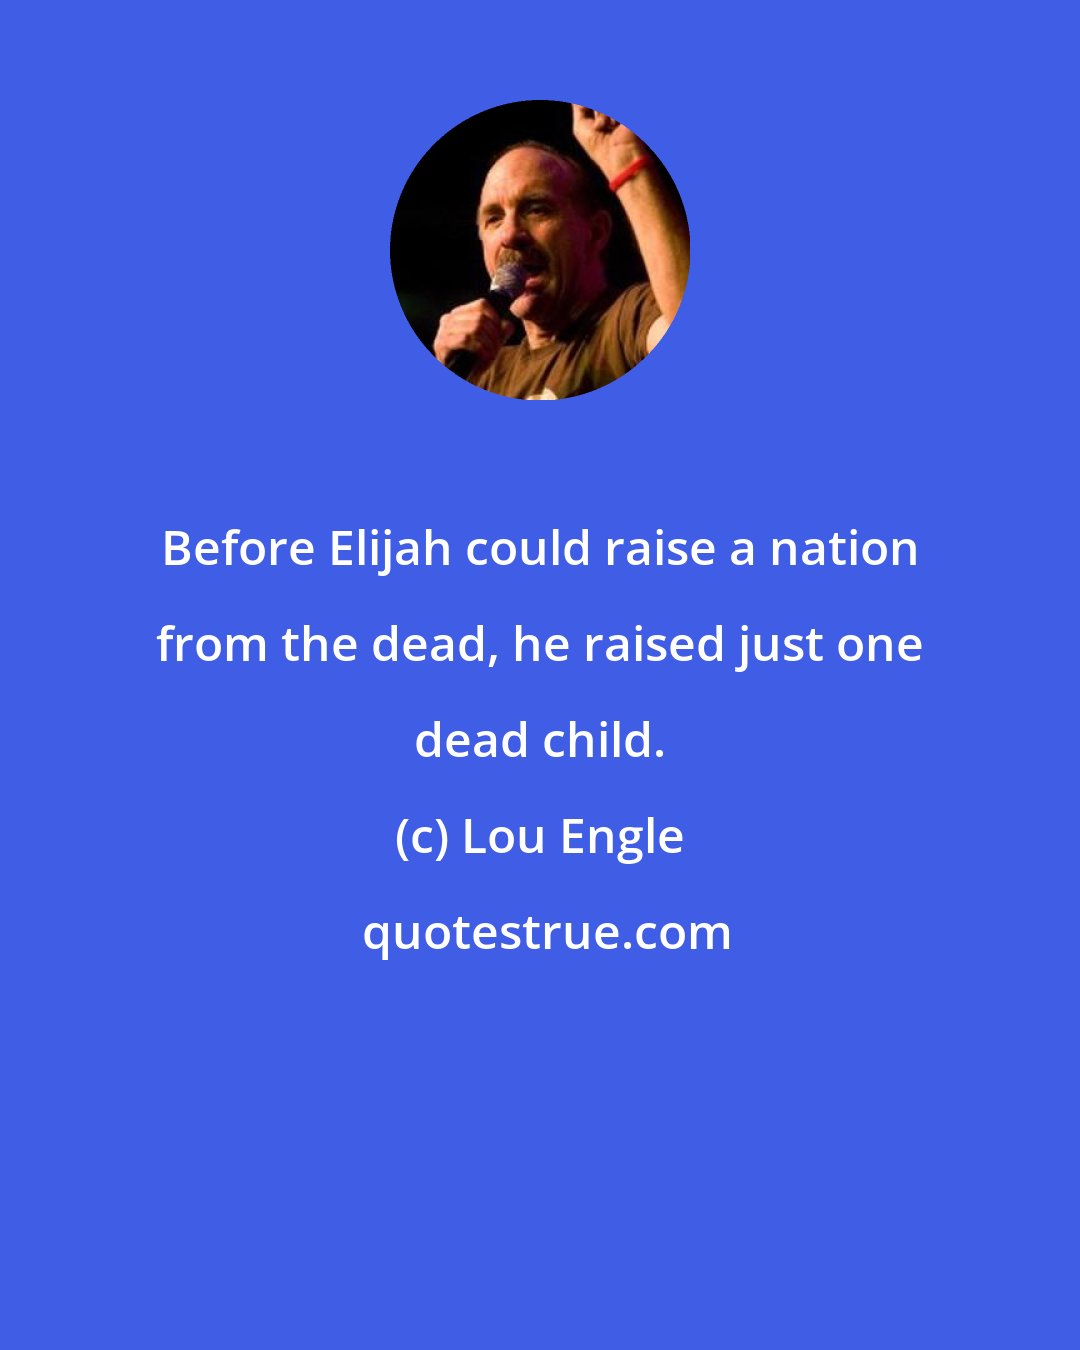 Lou Engle: Before Elijah could raise a nation from the dead, he raised just one dead child.